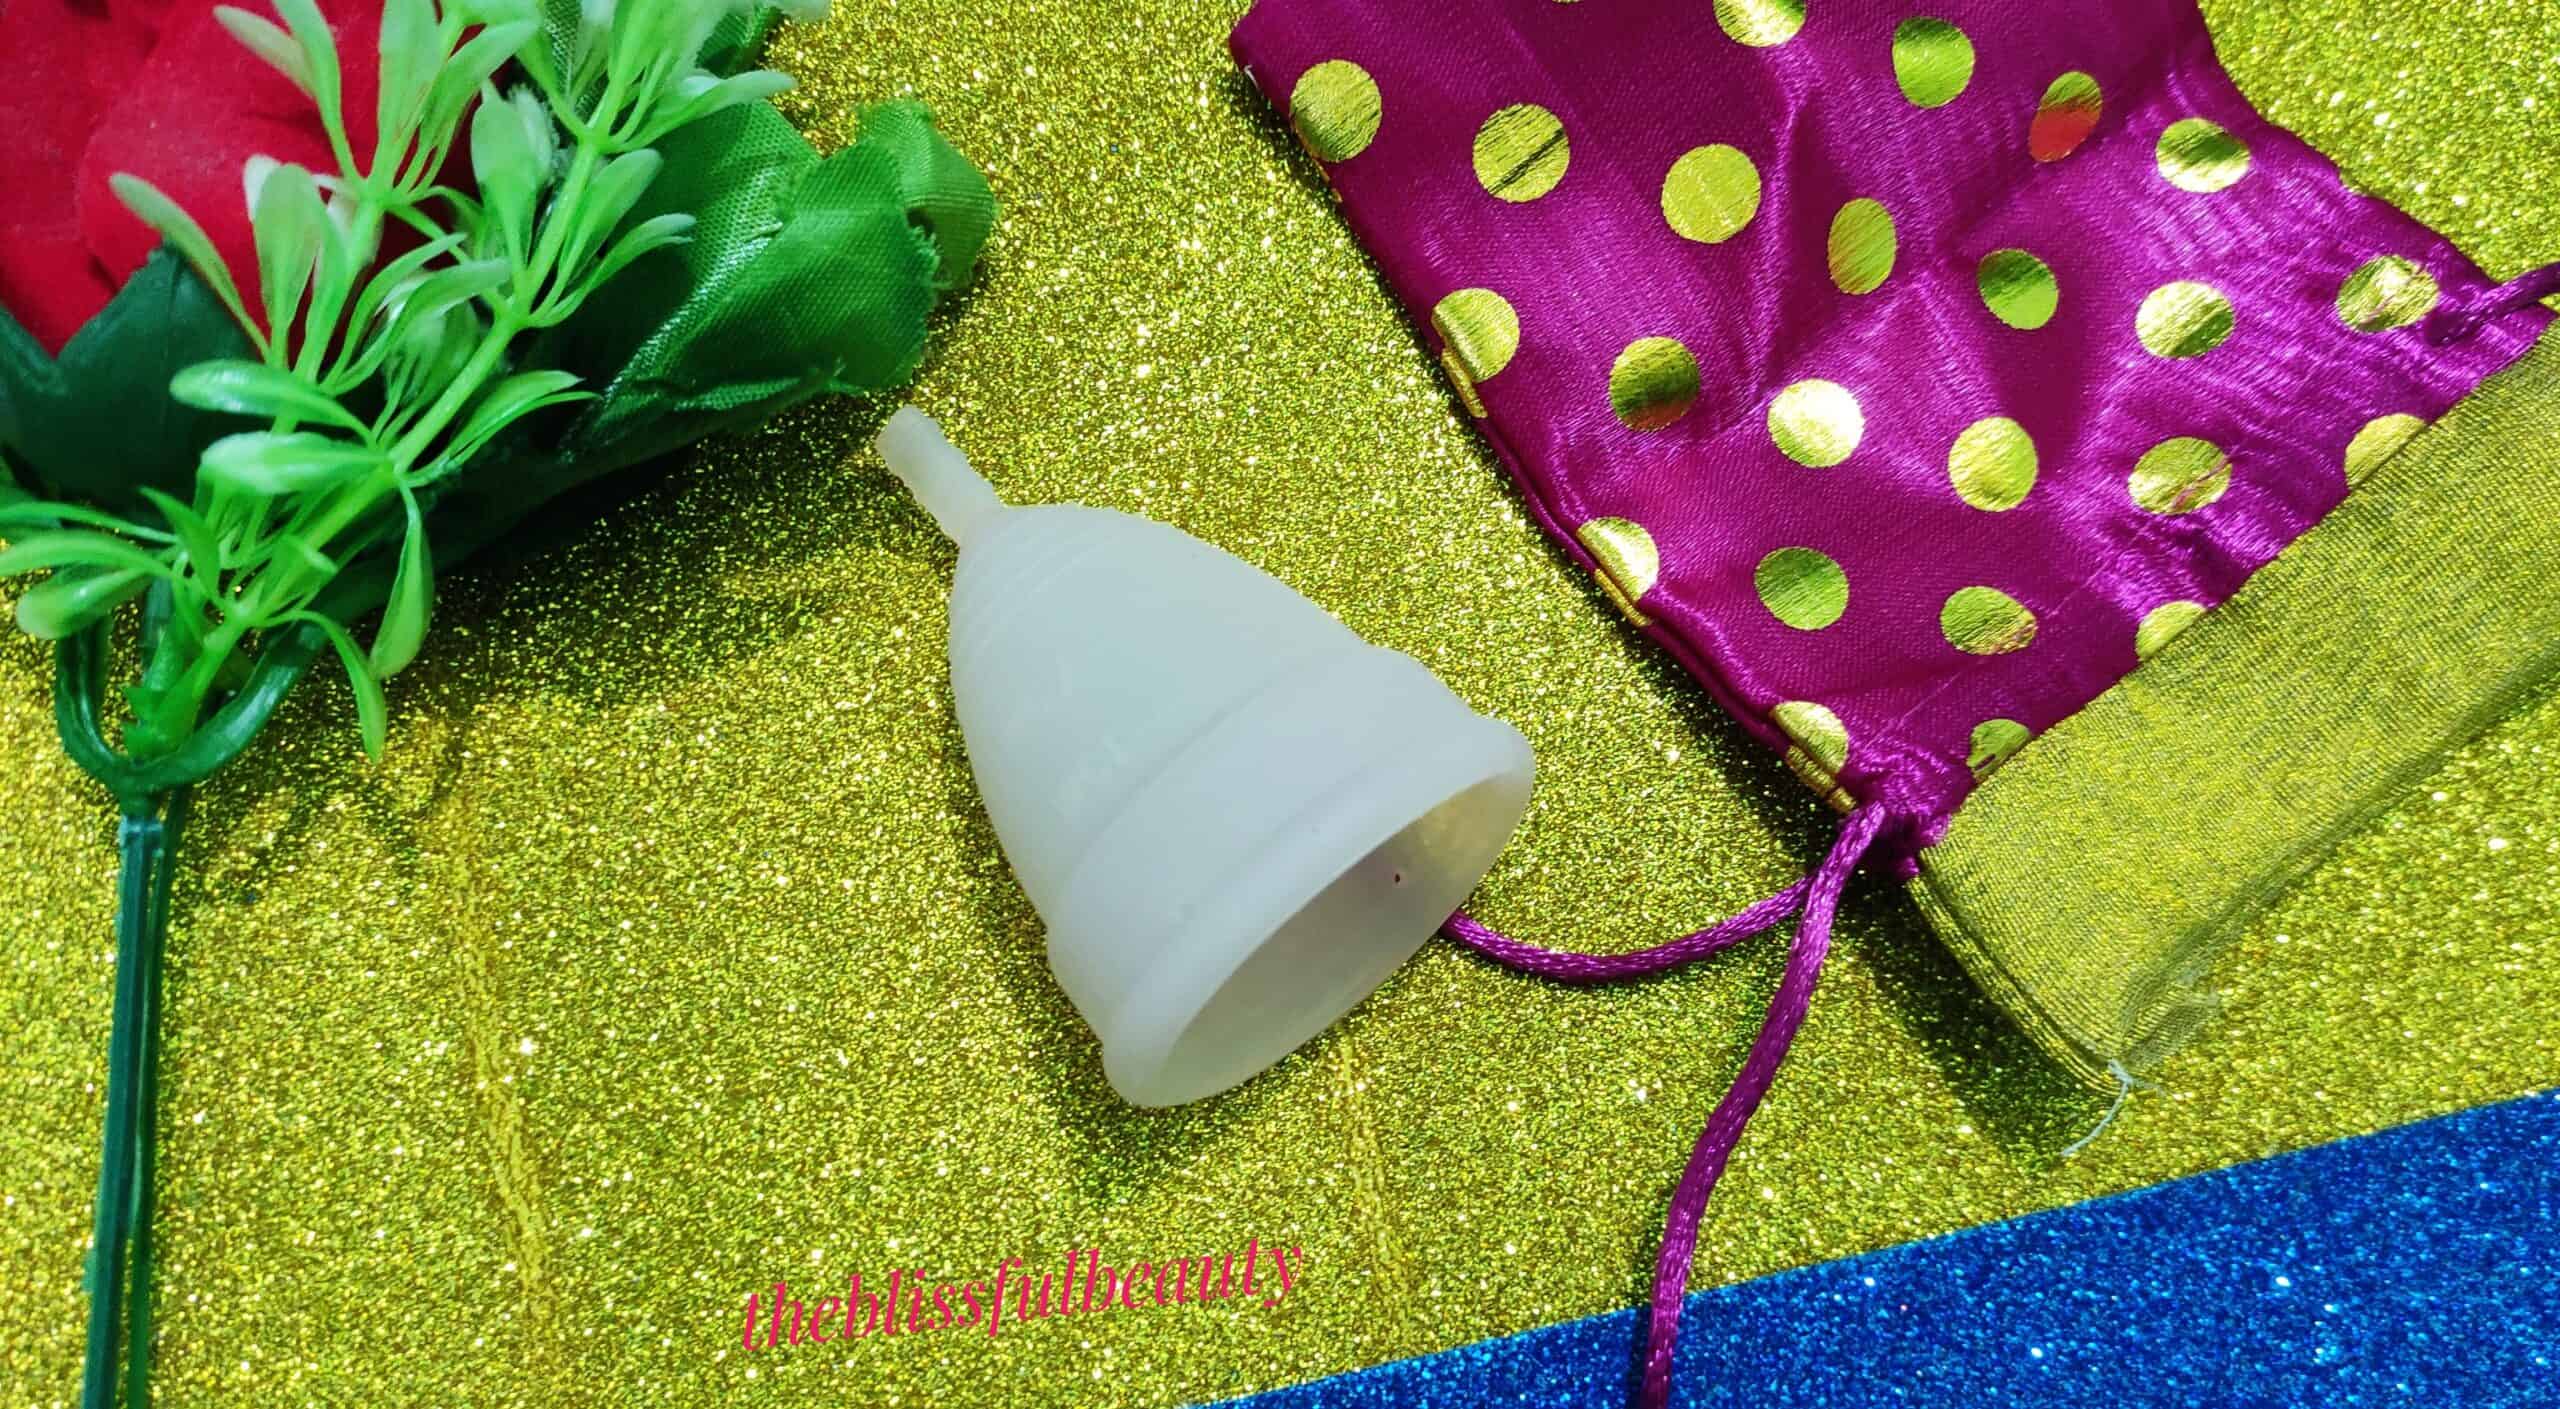 Some facts about female hygiene we always neglect: Everteen Menstrual cup